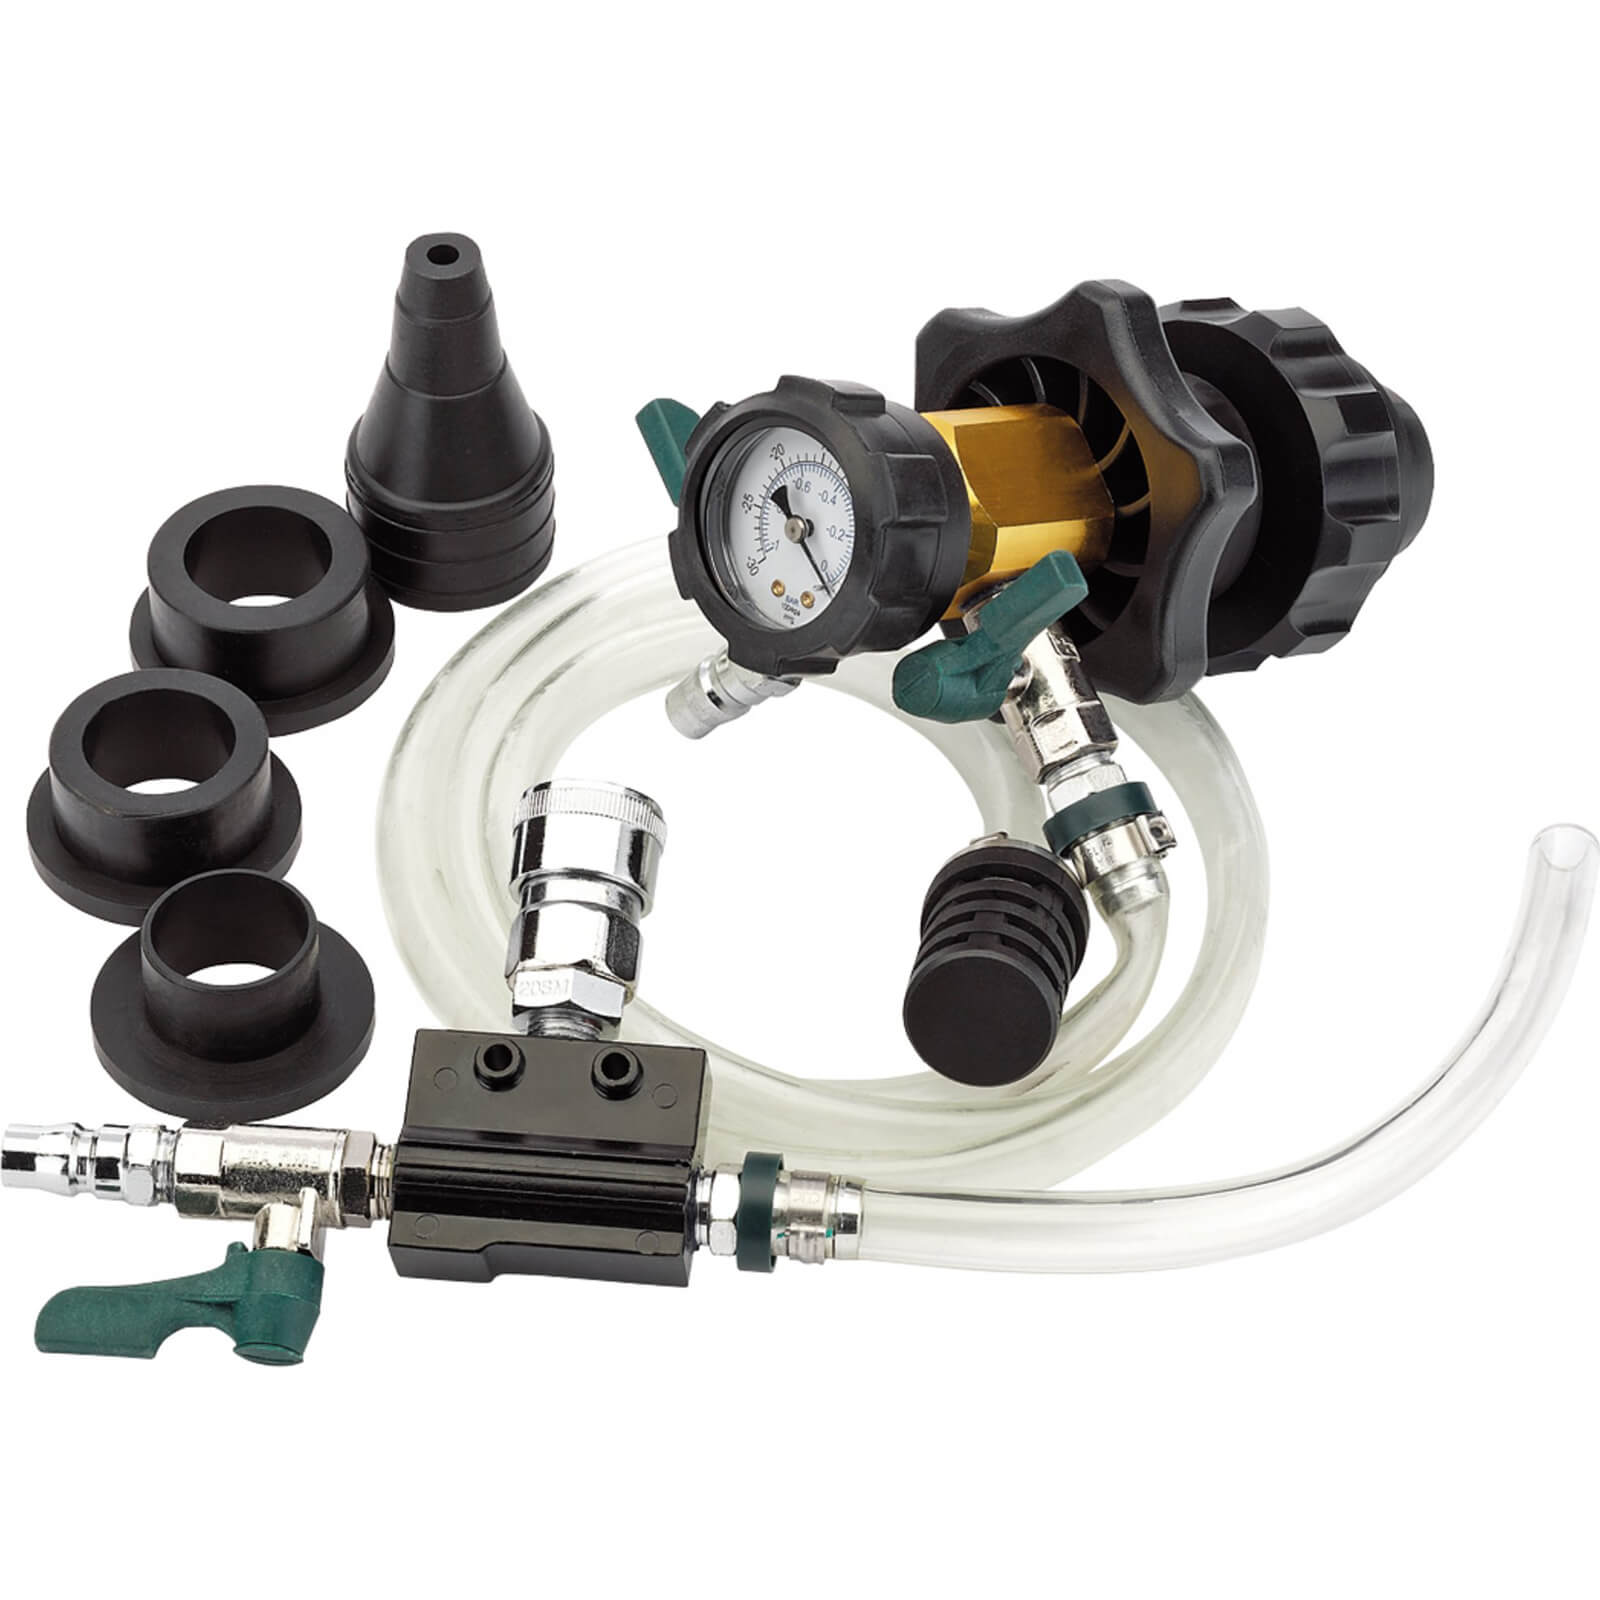 Image of Draper Expert Universal Cooling System Vacuum Purge and Refill Set